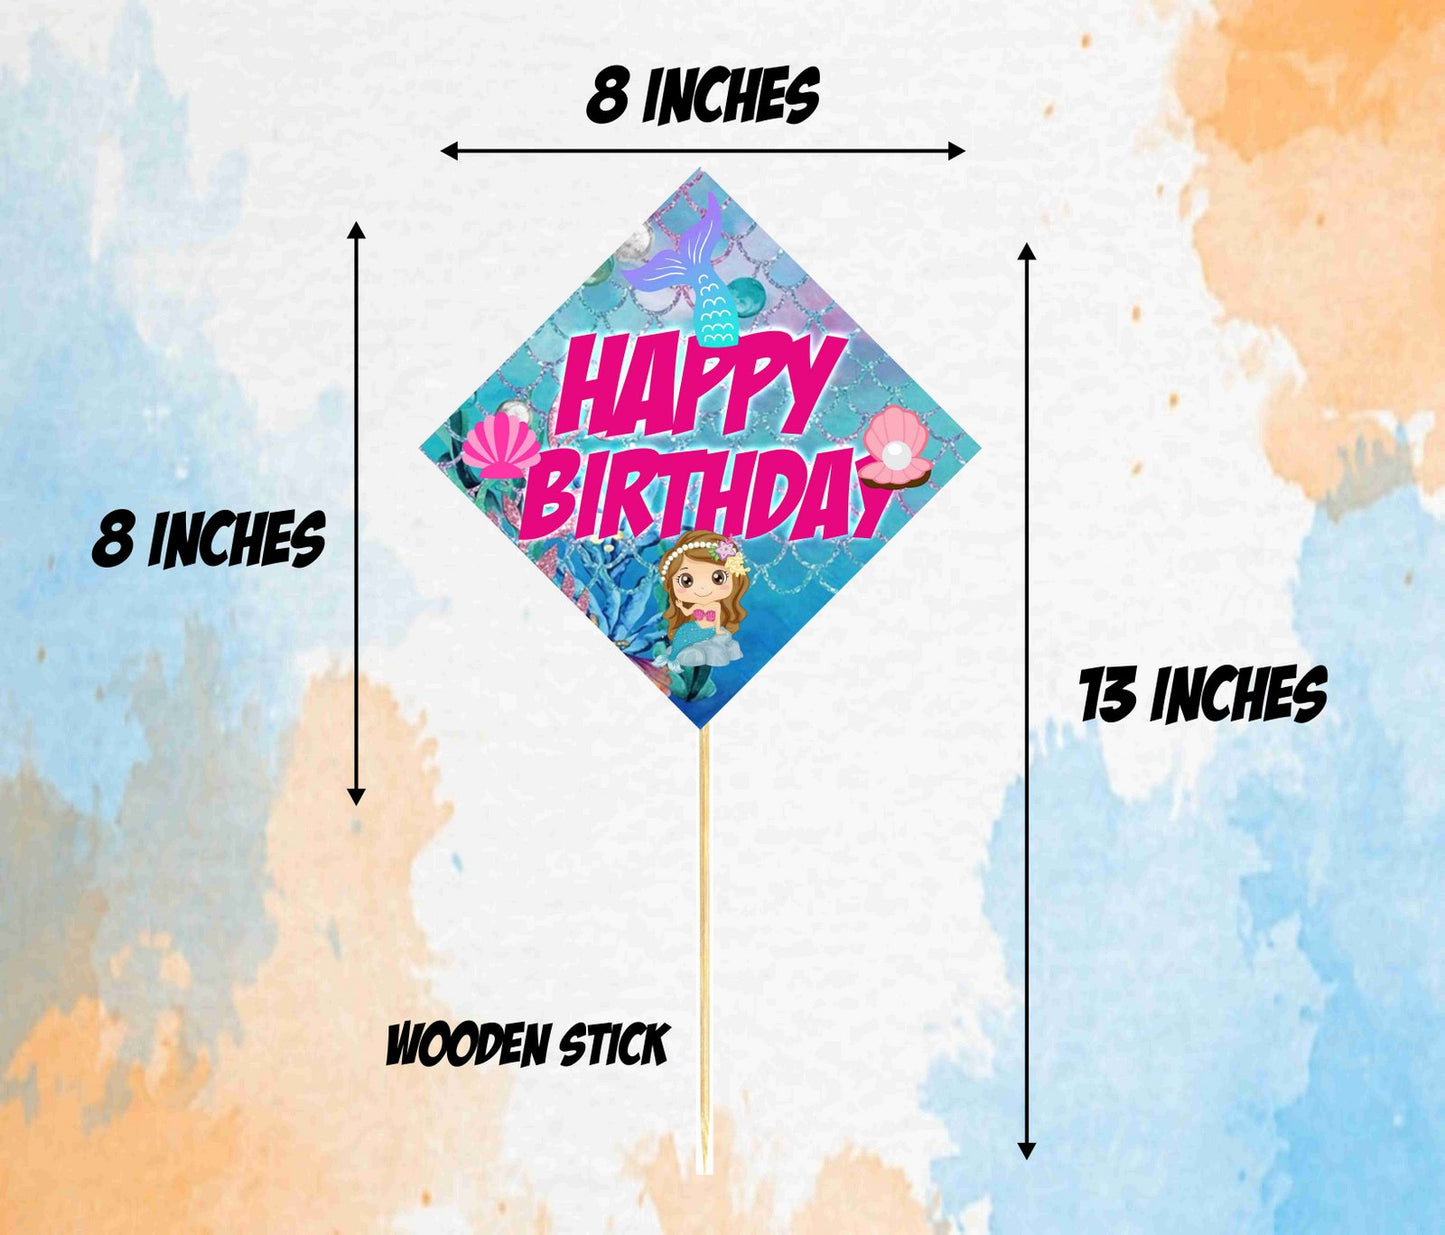 Mermaid Theme Birthday Photo Booth Party Props Theme Birthday Party Decoration, Birthday Photo Booth Party Item for Adults and Kids